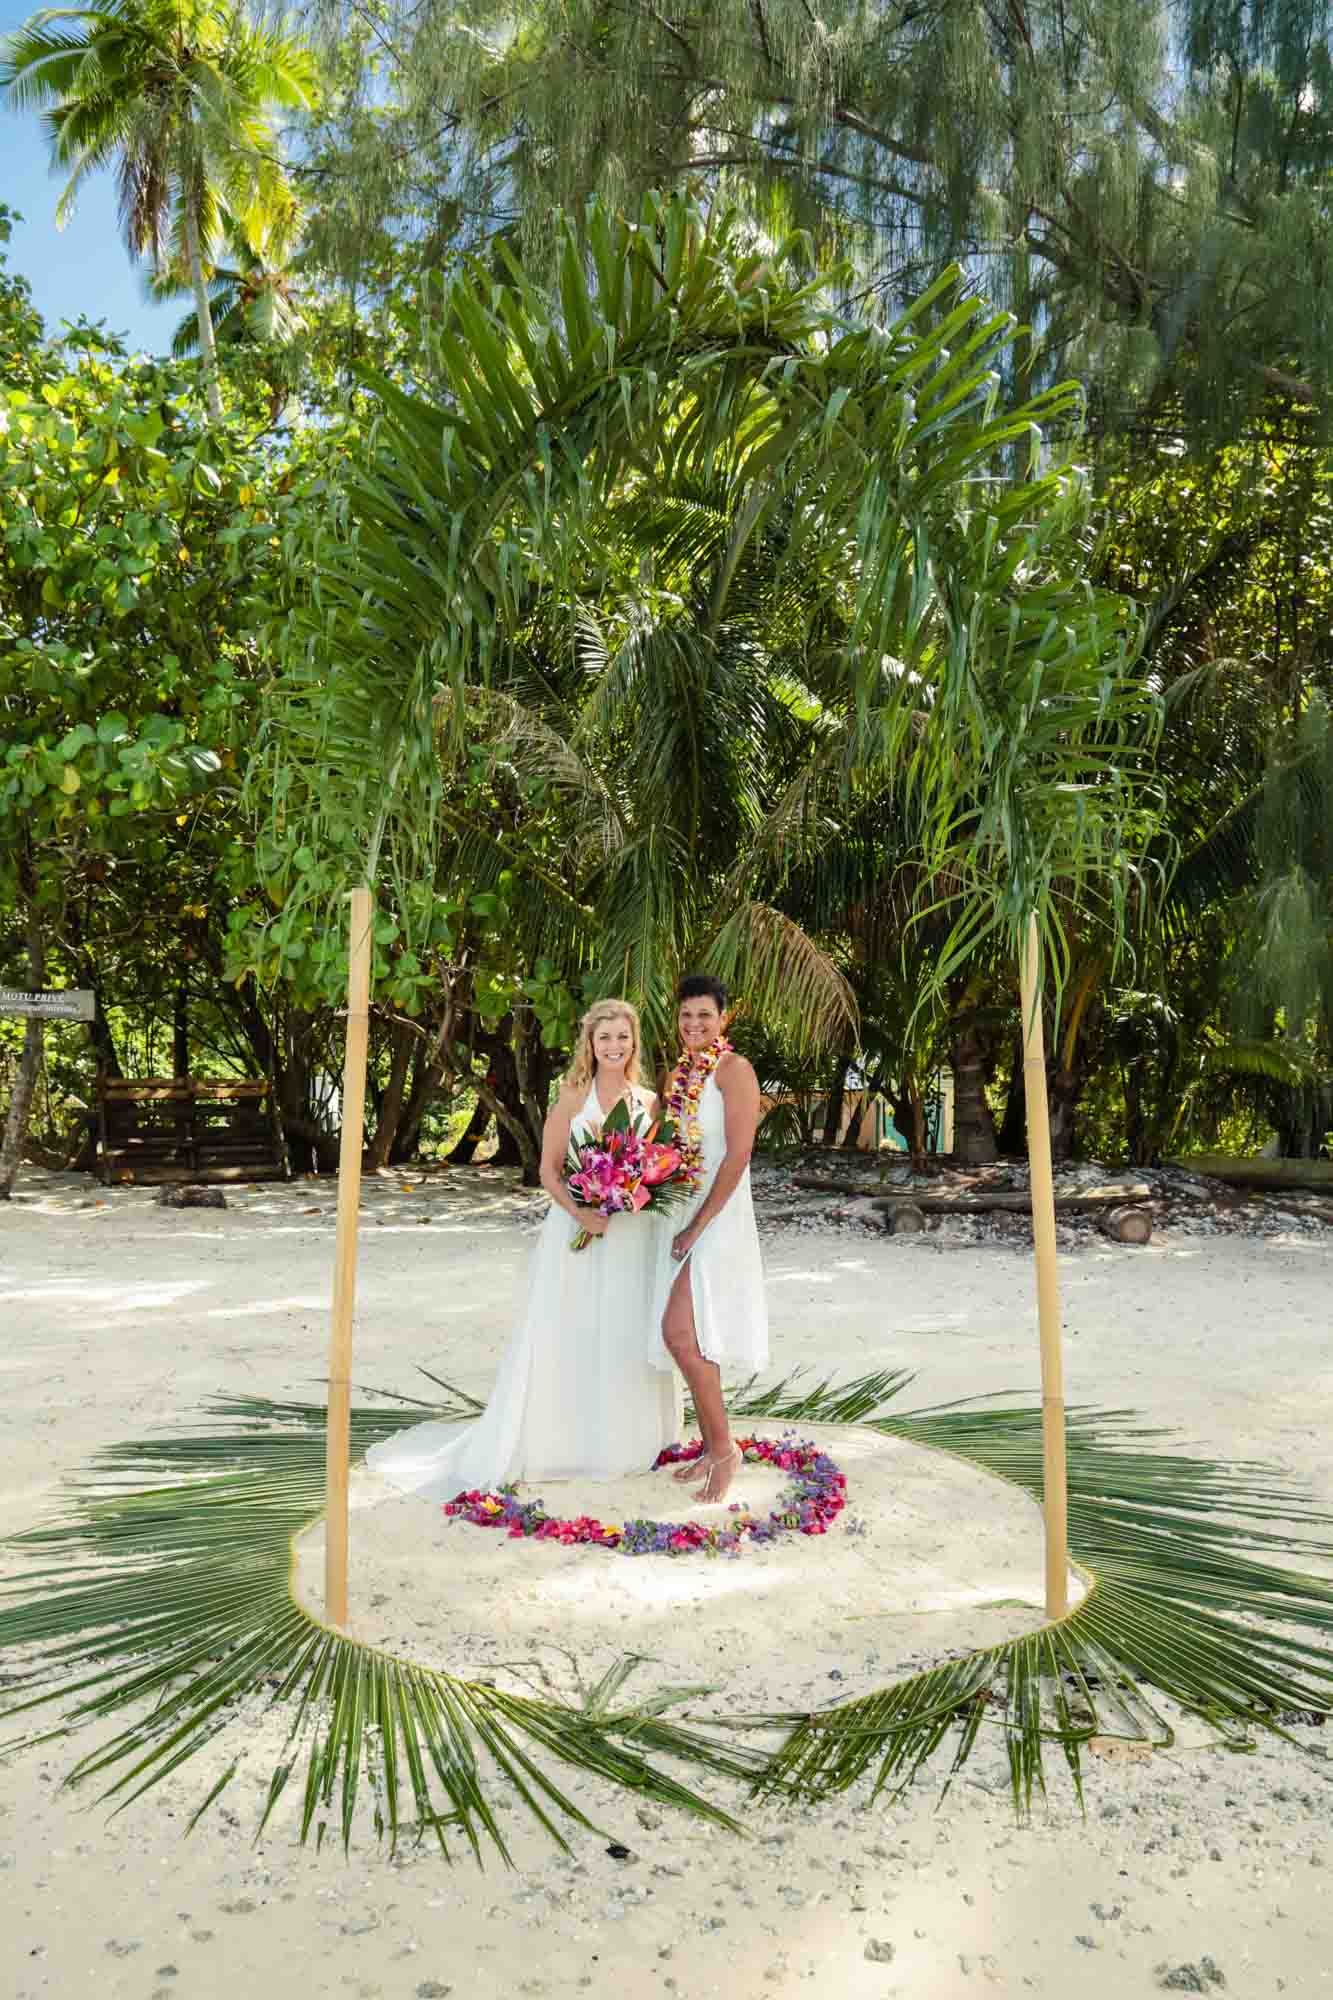 Epic private beach elopement in French Polynesia | Olivera Photography | Featured on Equally Wed, the leading LGBTQ+ wedding magazine